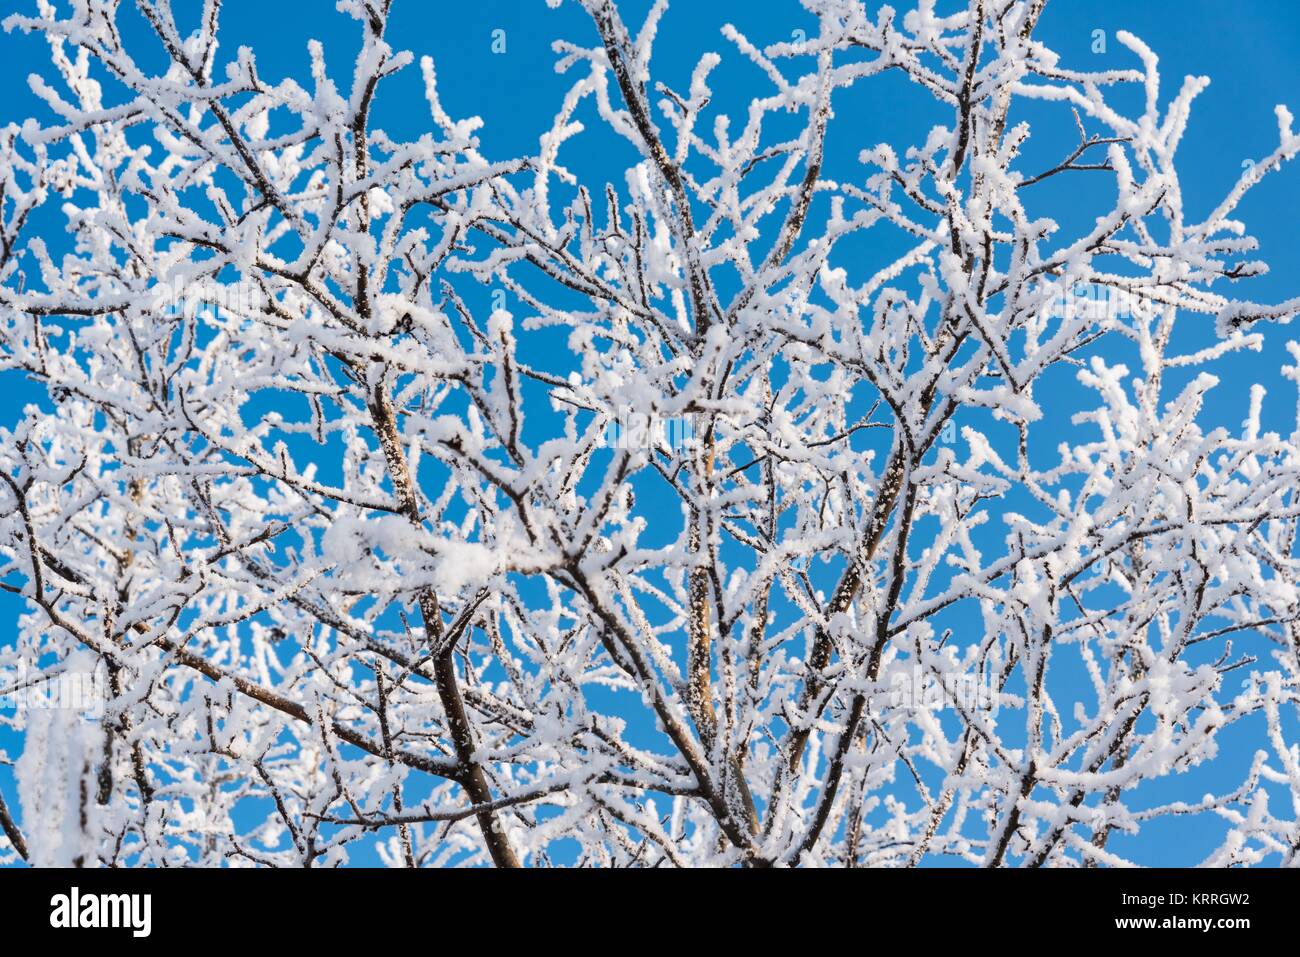 Tree branches covered with snow against a blue sky in winter Stock Photo